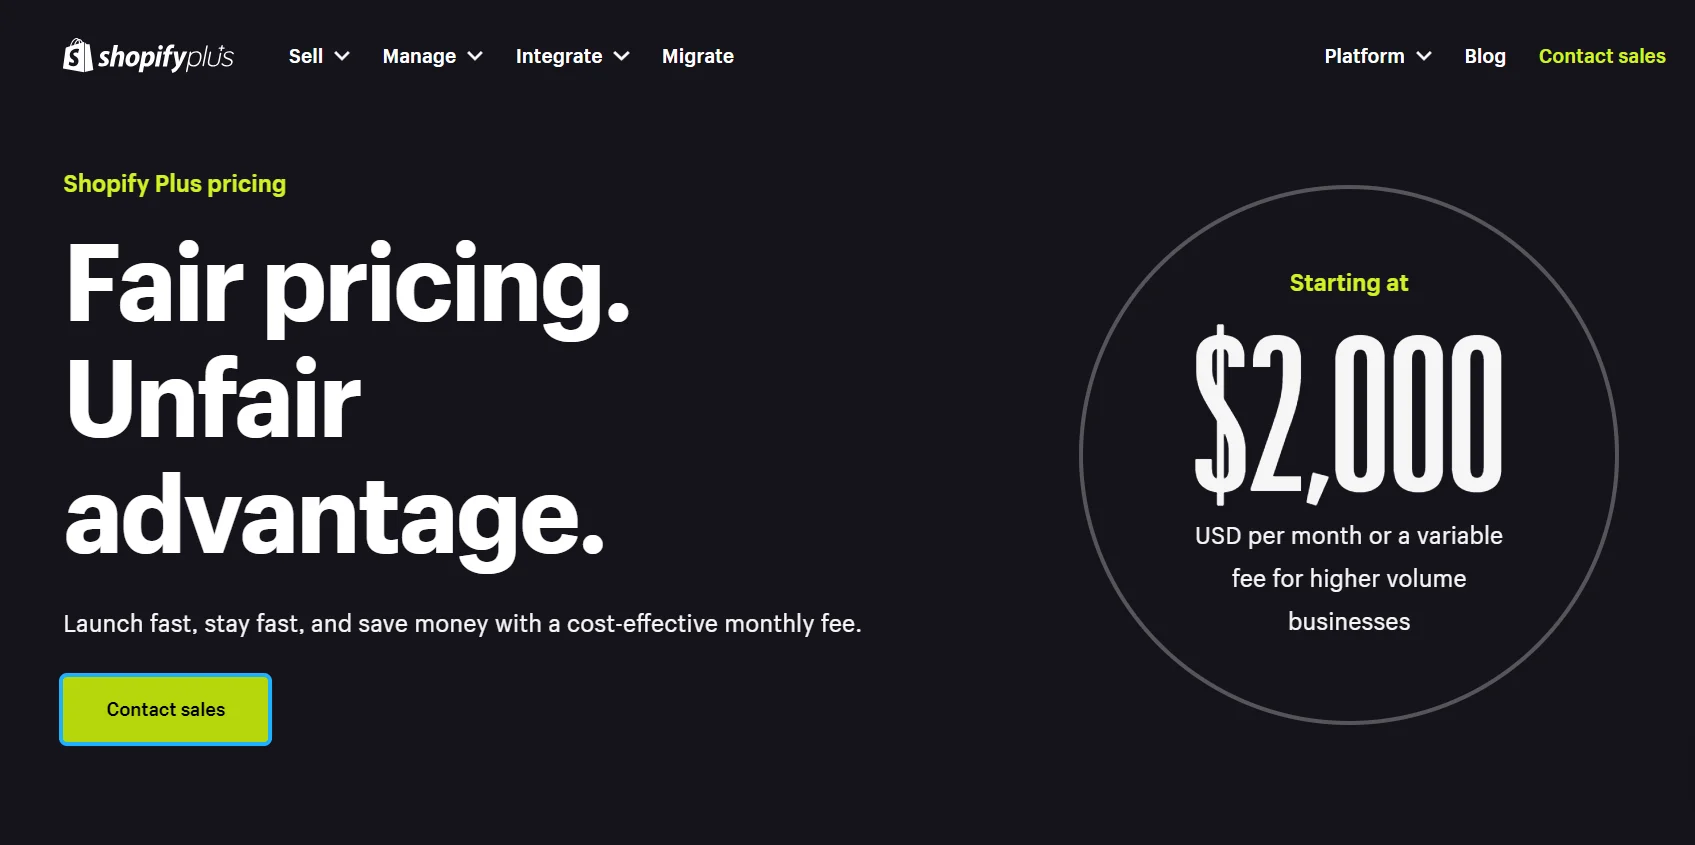 Shopify Plus pricing 